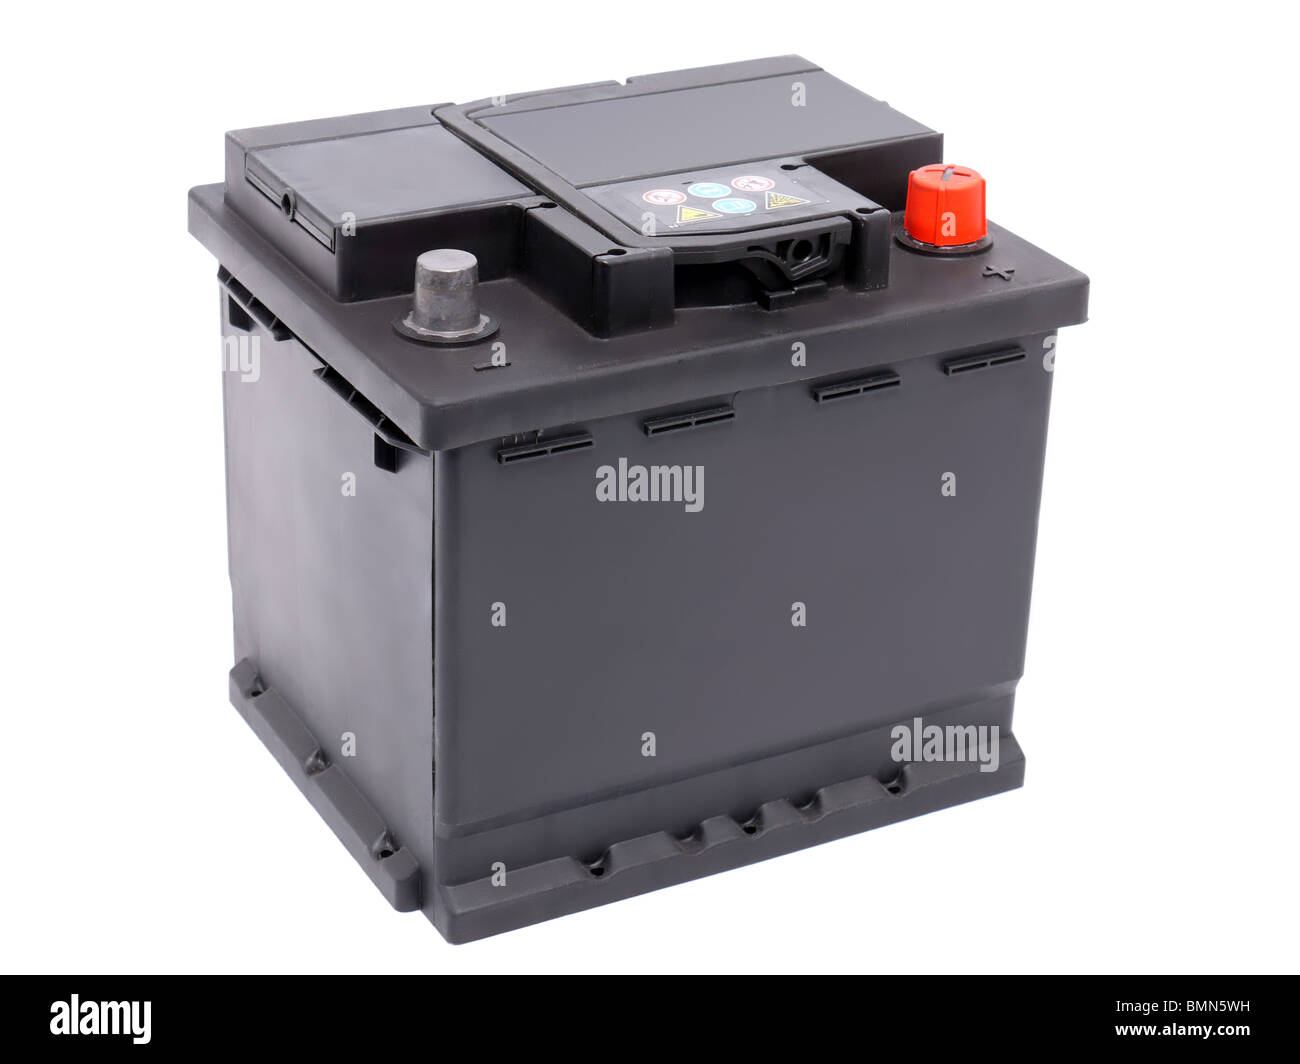 12v Battery High Resolution Stock Photography and Images - Alamy